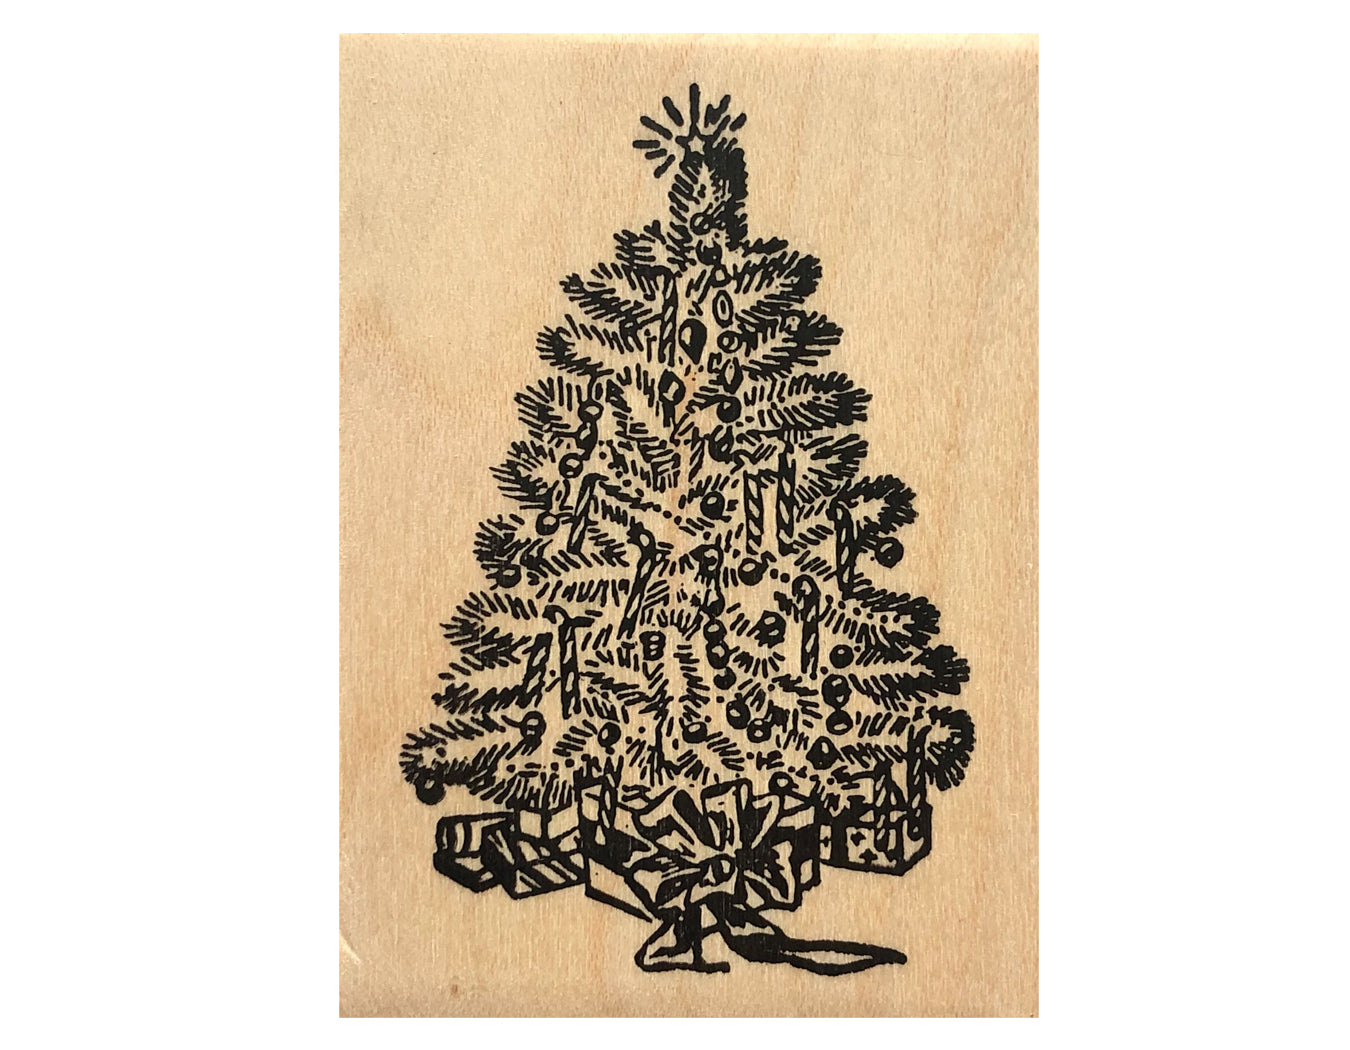 Christmas Tree Rubber Stamp